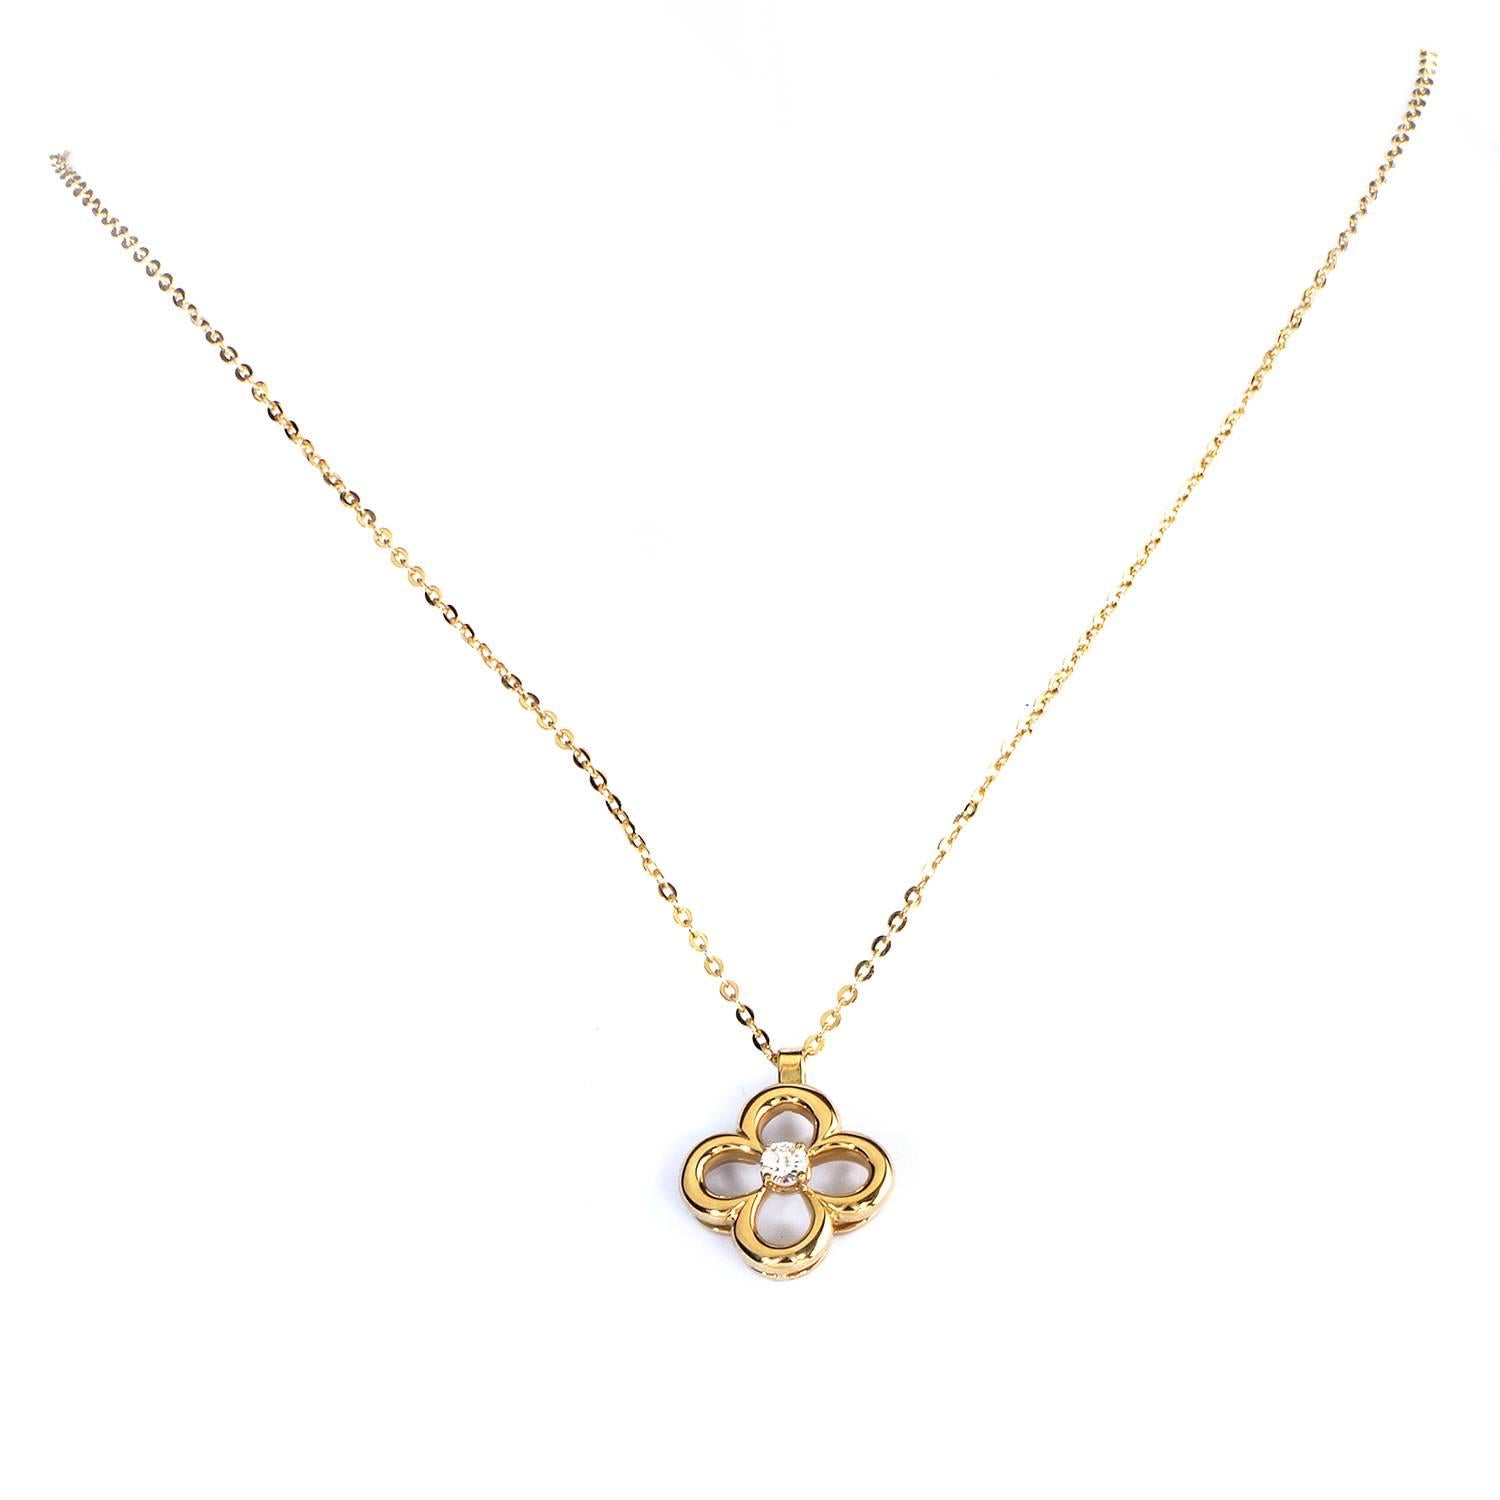 Honoring their never-ending dedication to celebrating nature in its most beautiful aspects, Van Cleef & Arpels present another fantastic depiction of a flower that exudes classic luxury through 18K yellow gold and dazzling 0.25ct diamond.
Included